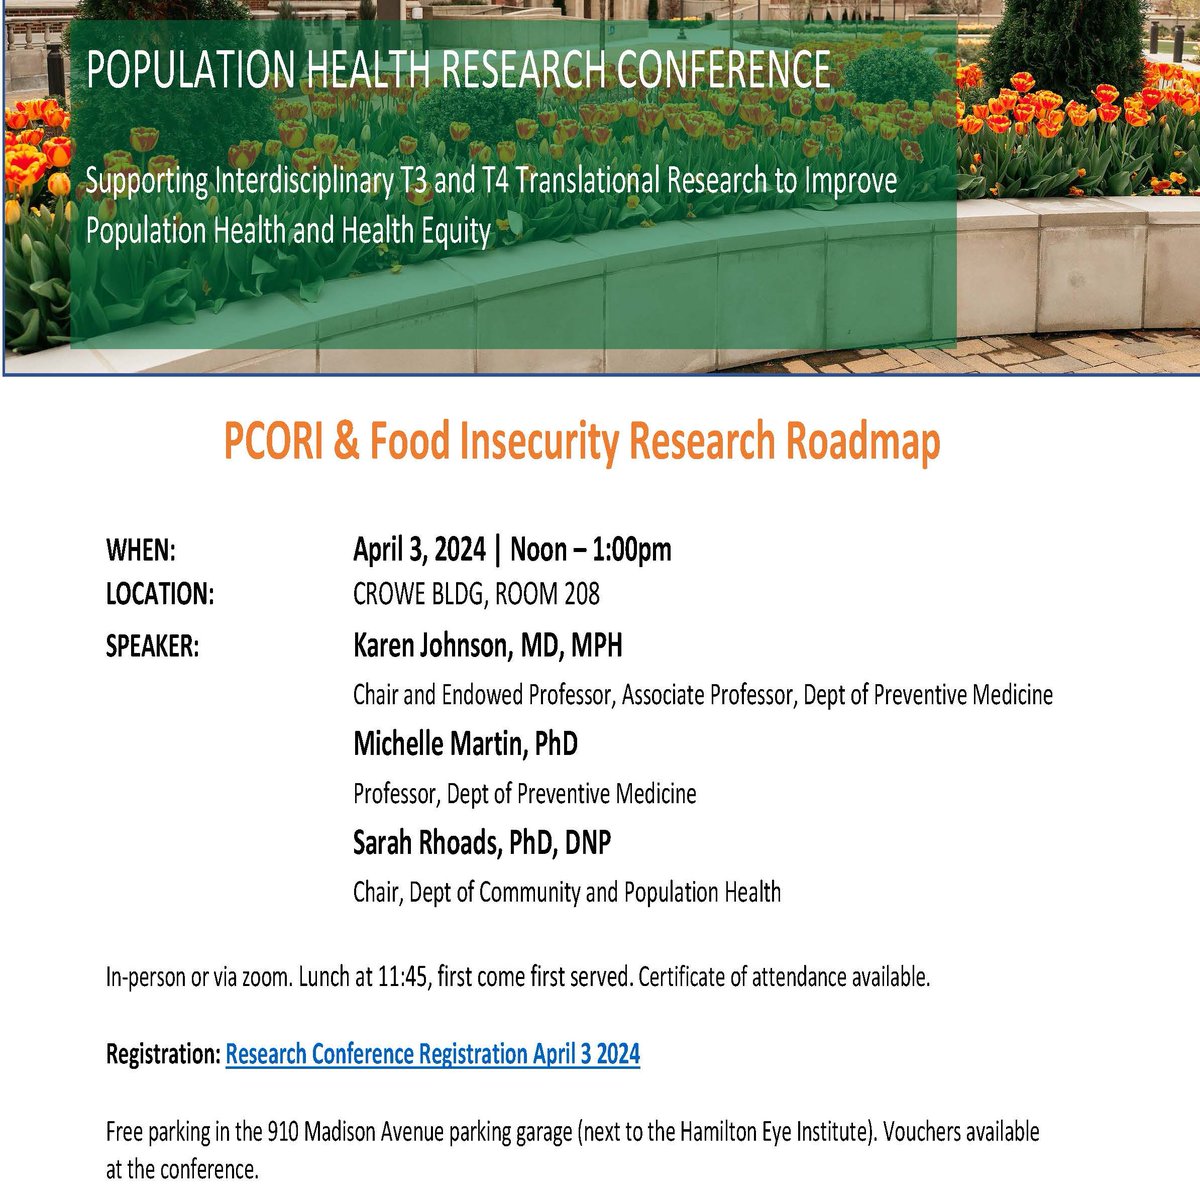 One week from today! Join us April 3 for a panel on PCORI & Food Insecurity Research Roadmap. Online or in person (free lunch). See below. To register: tinyurl.com/3m5m58vf @uthsc @uthscresearch #pcori #foodinsecurity